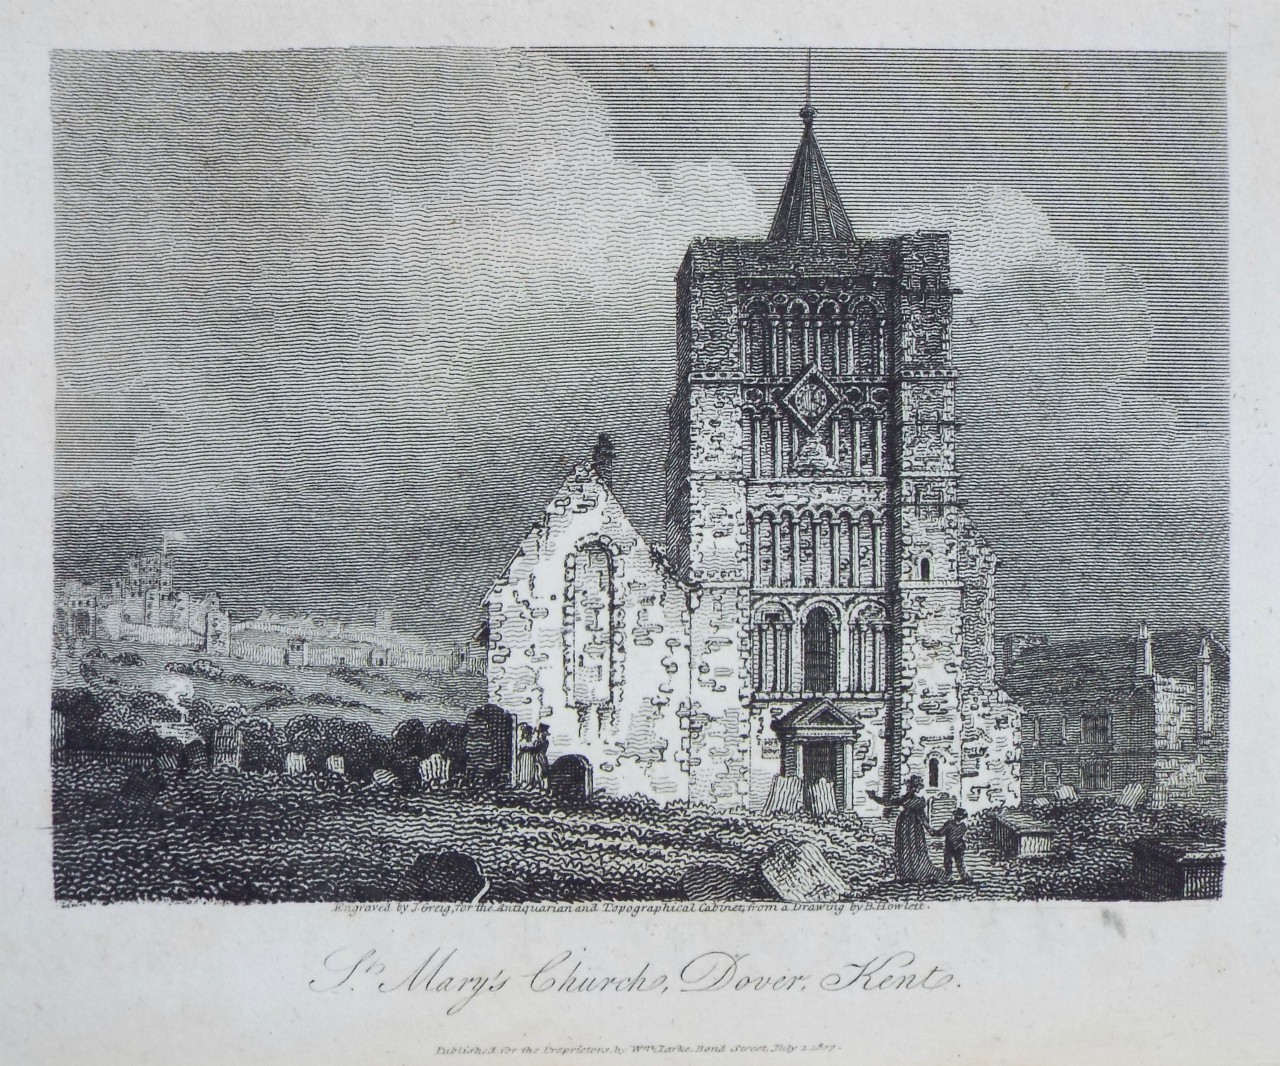 Print - St. Mary's Church, Dover, Kent. - Greig